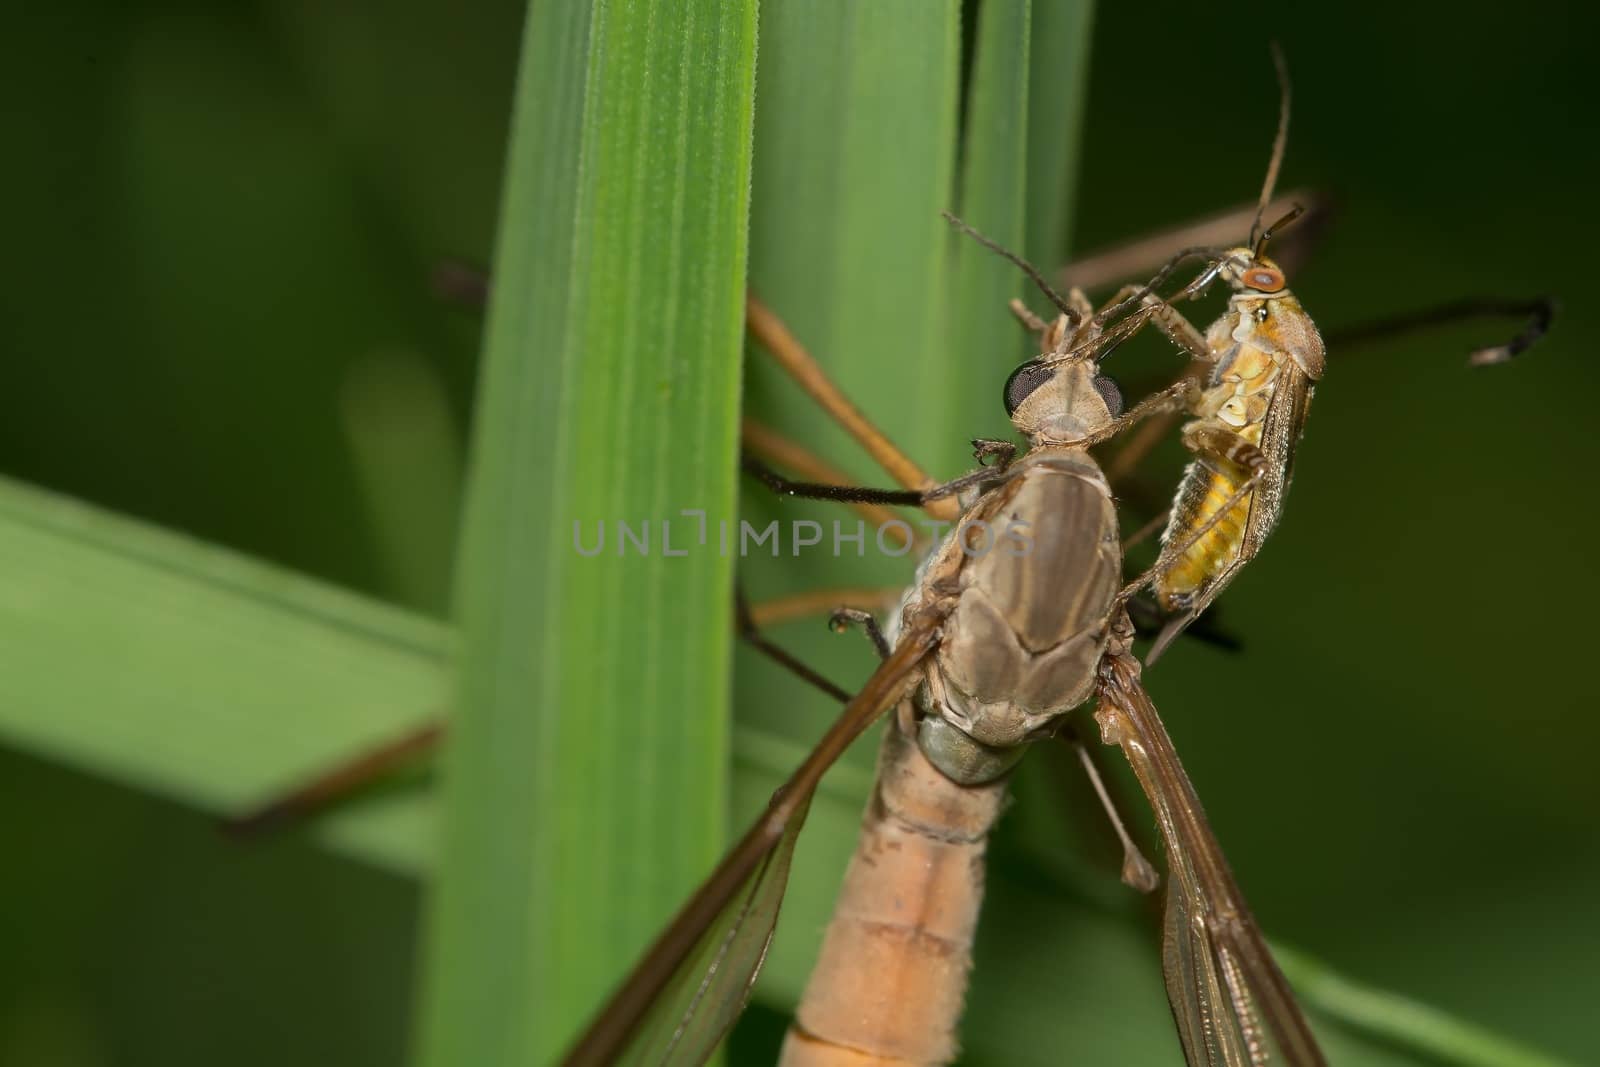 Big mosquito with other small insect.